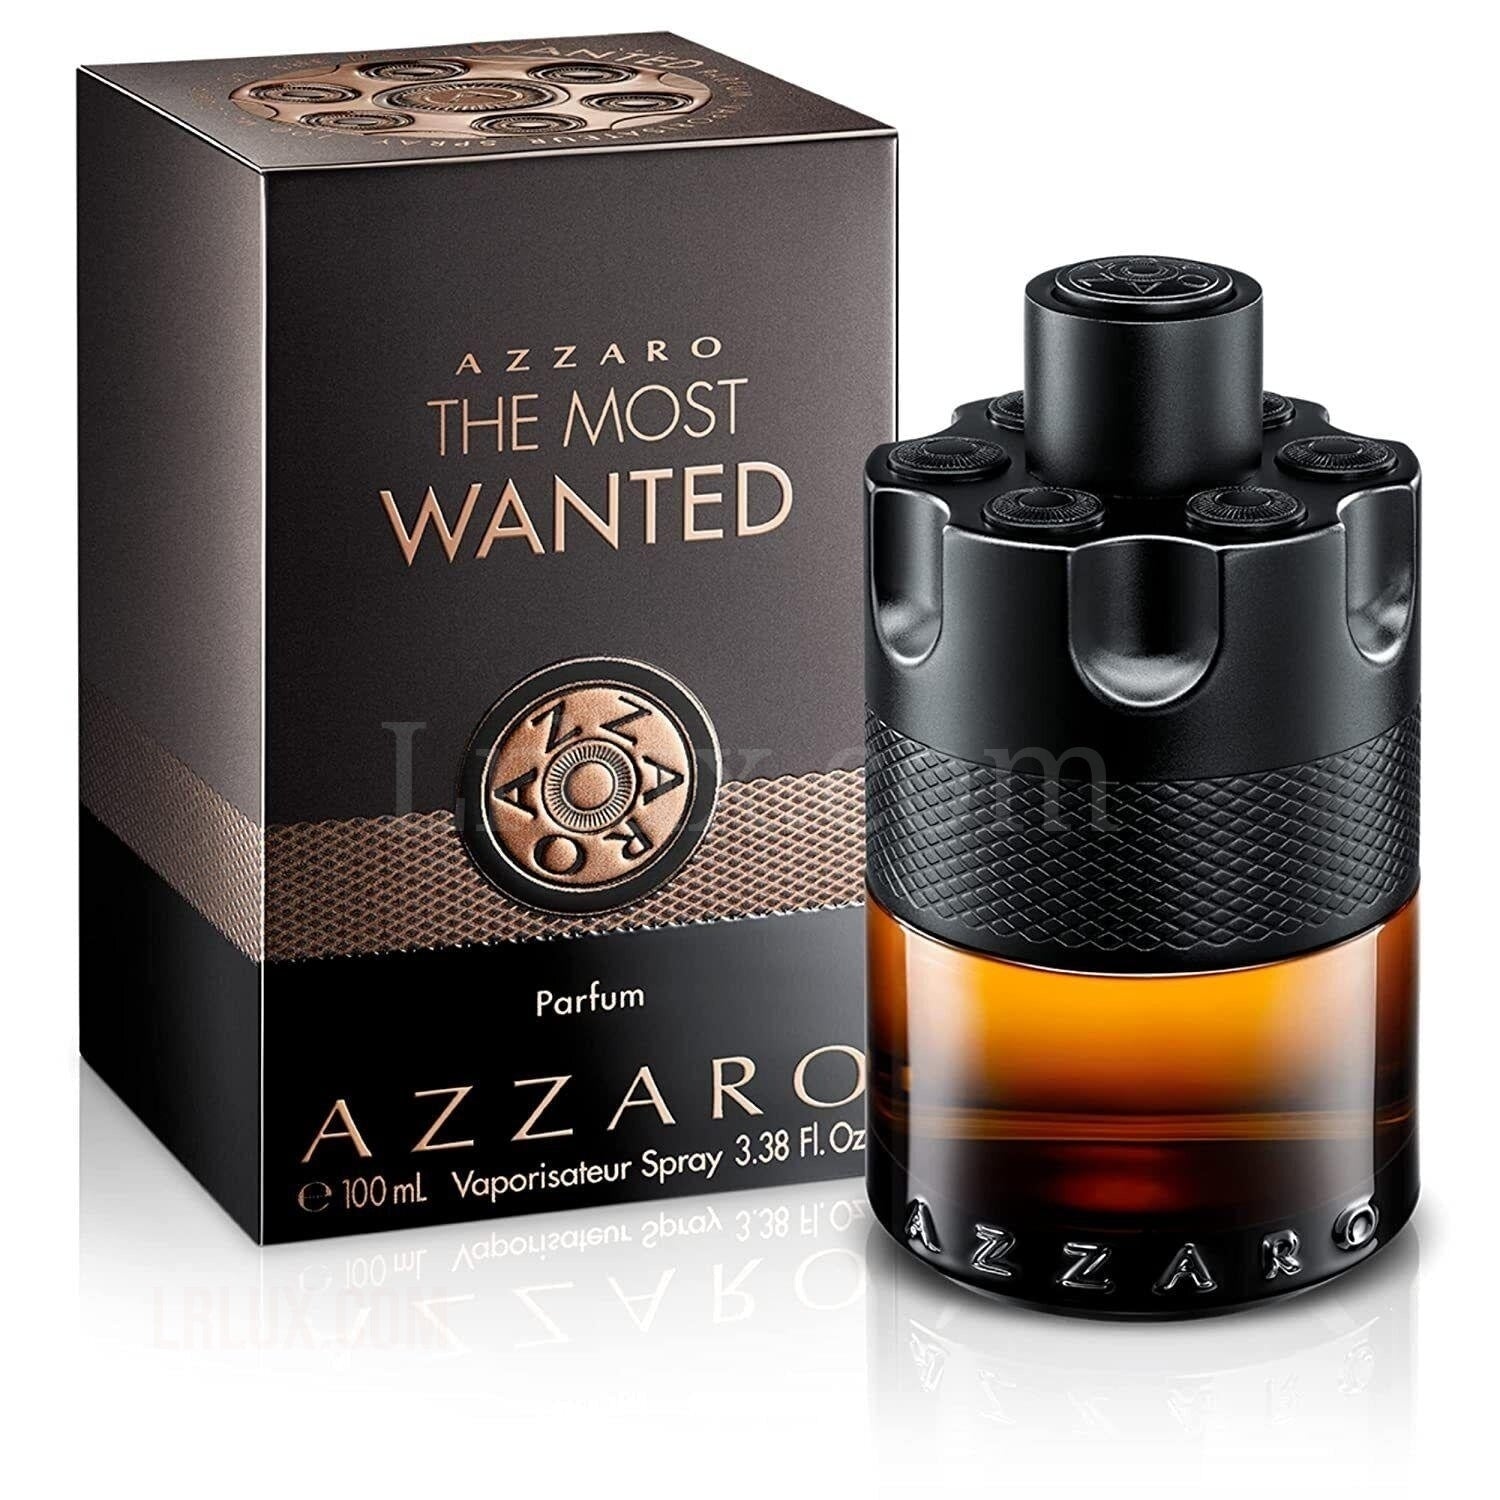 AZZARO THE MOST WANTED PARFUM 3.4 OZ EDP - Lrlux.com